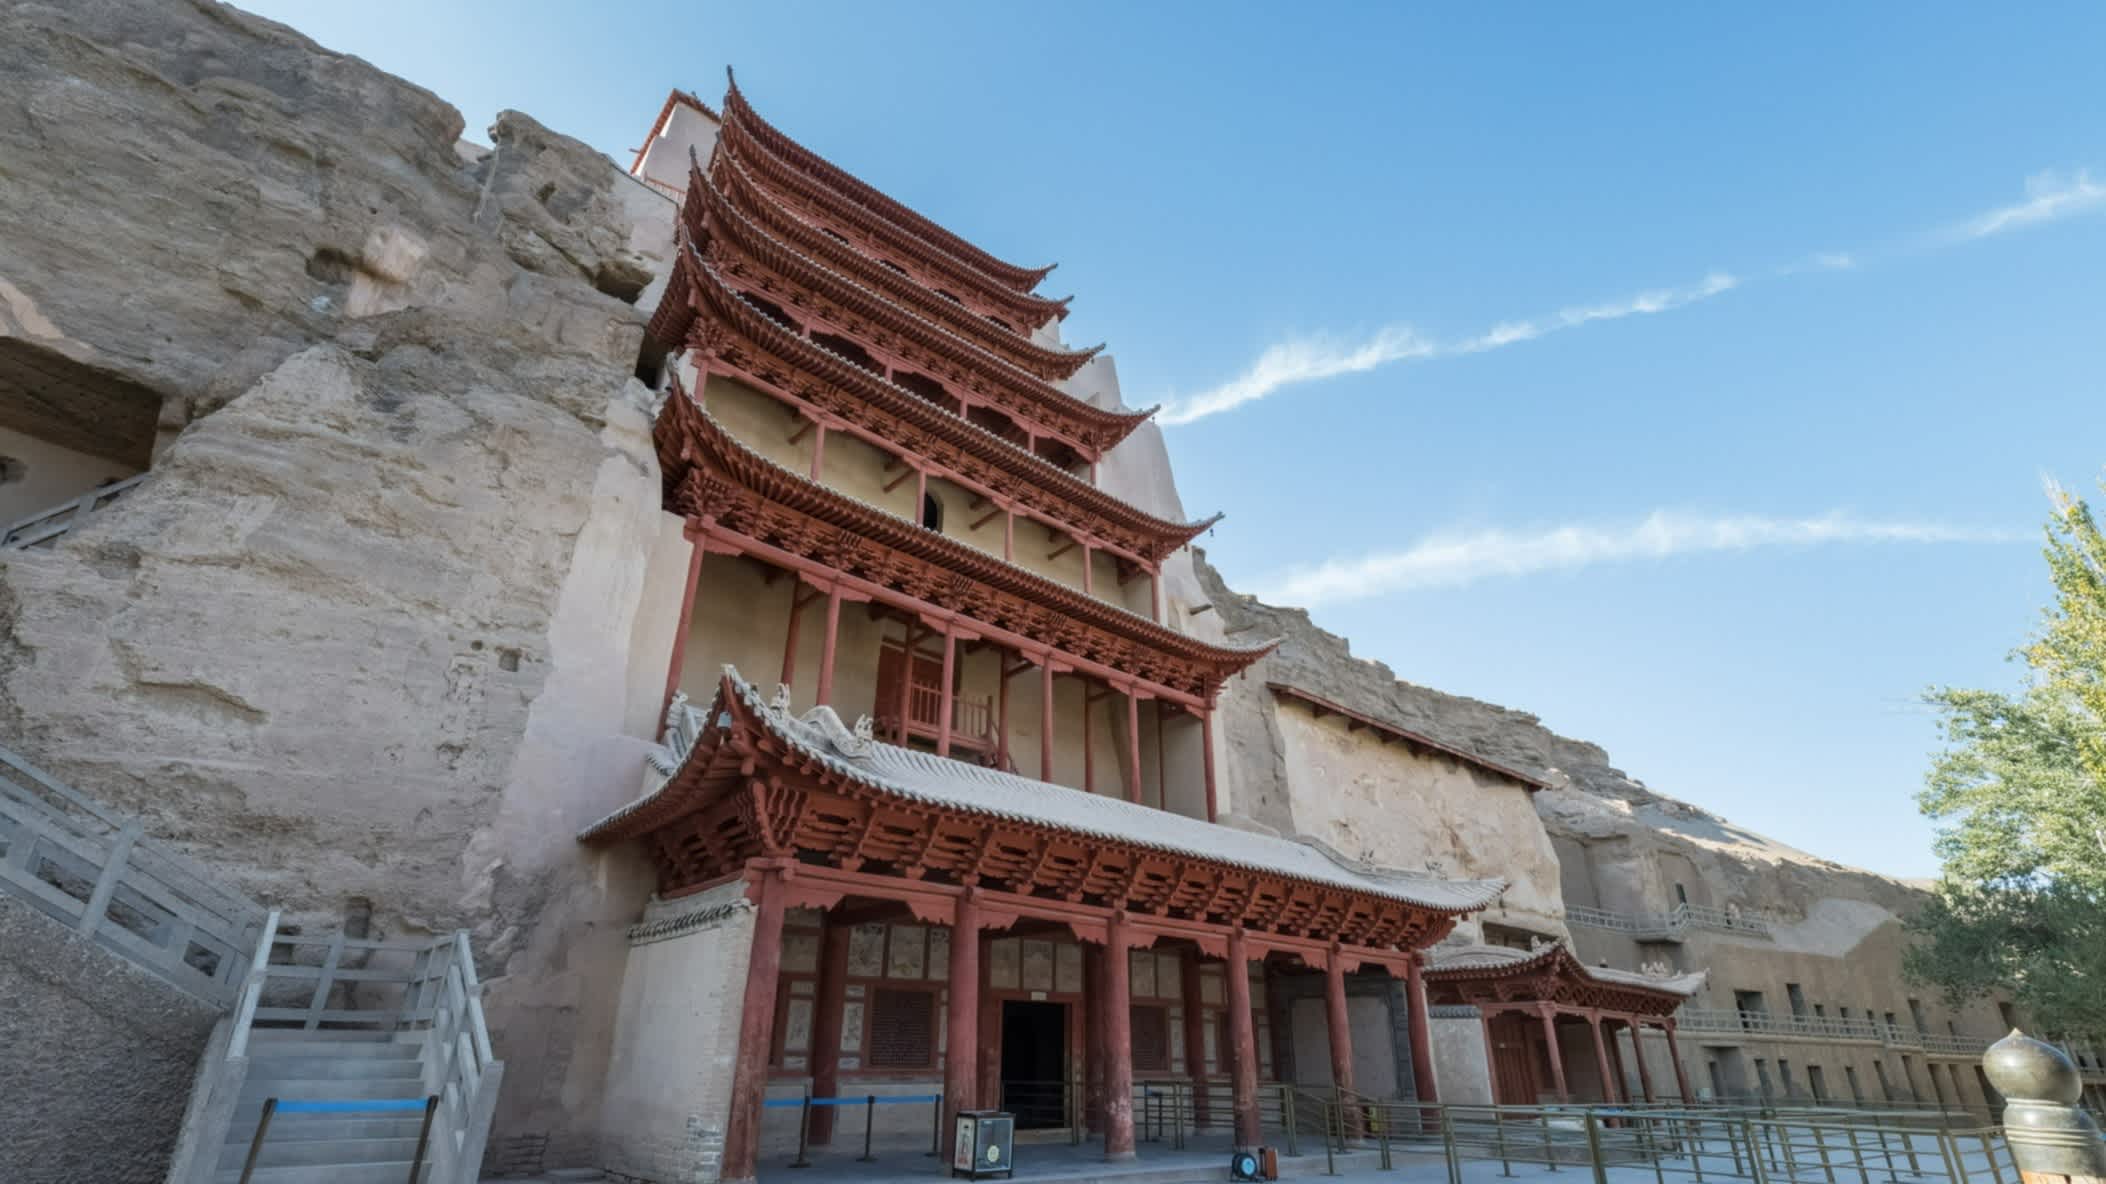 Entrance to the Dunhuang Caves, Mogao, China.